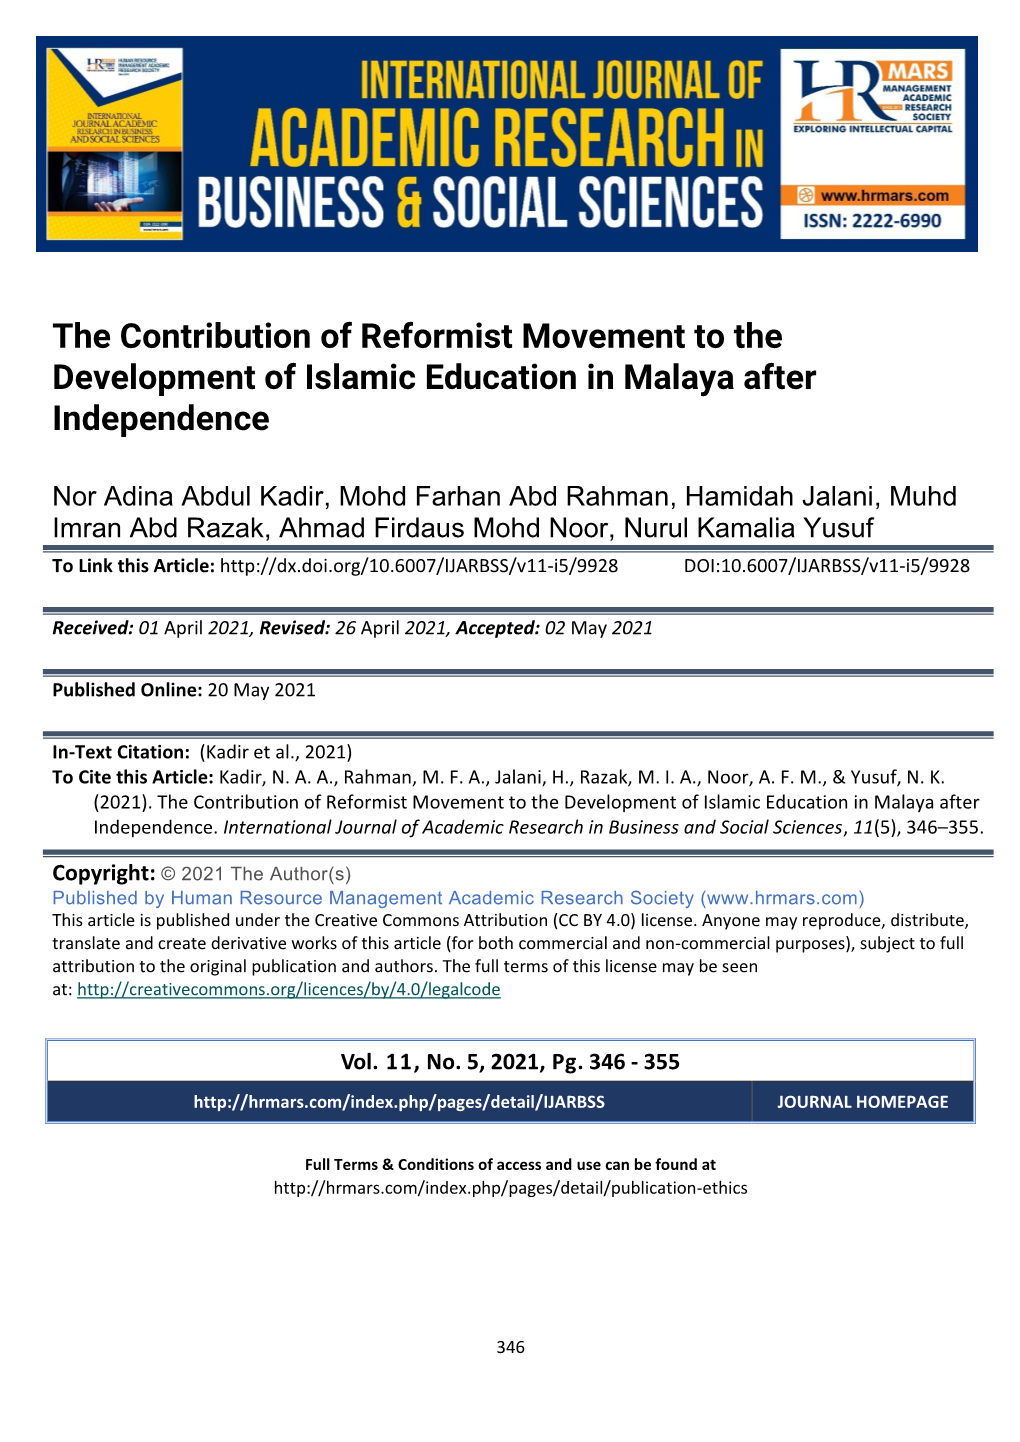 The Contribution of Reformist Movement to the Development of Islamic Education in Malaya After Independence